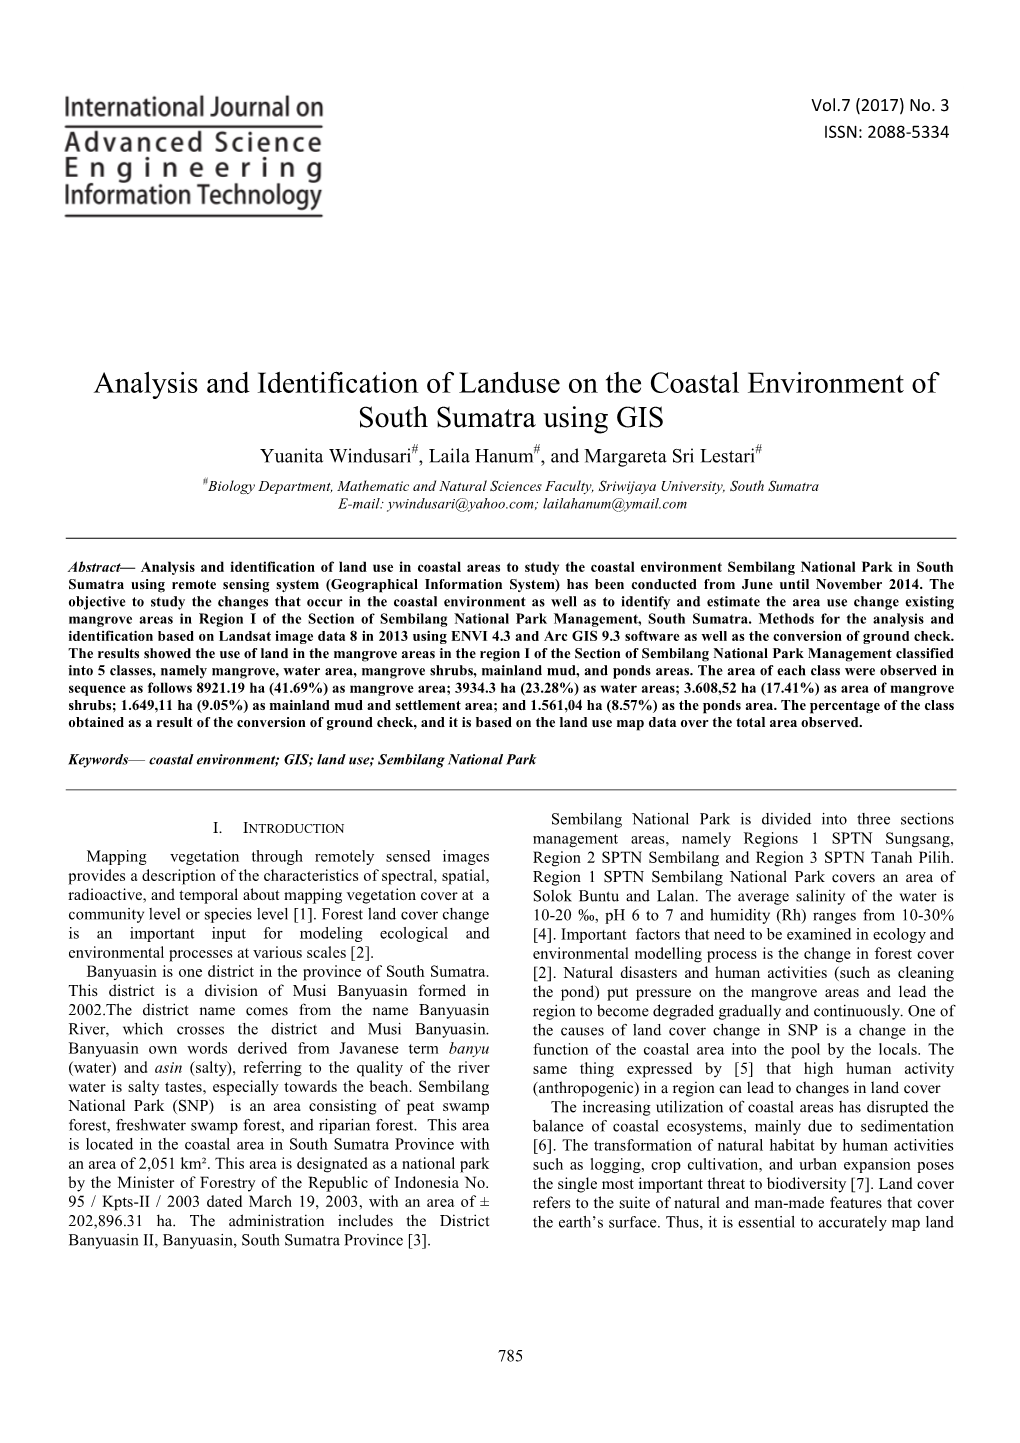 Analysis and Identification of Landuse on the Coastal Environment Of